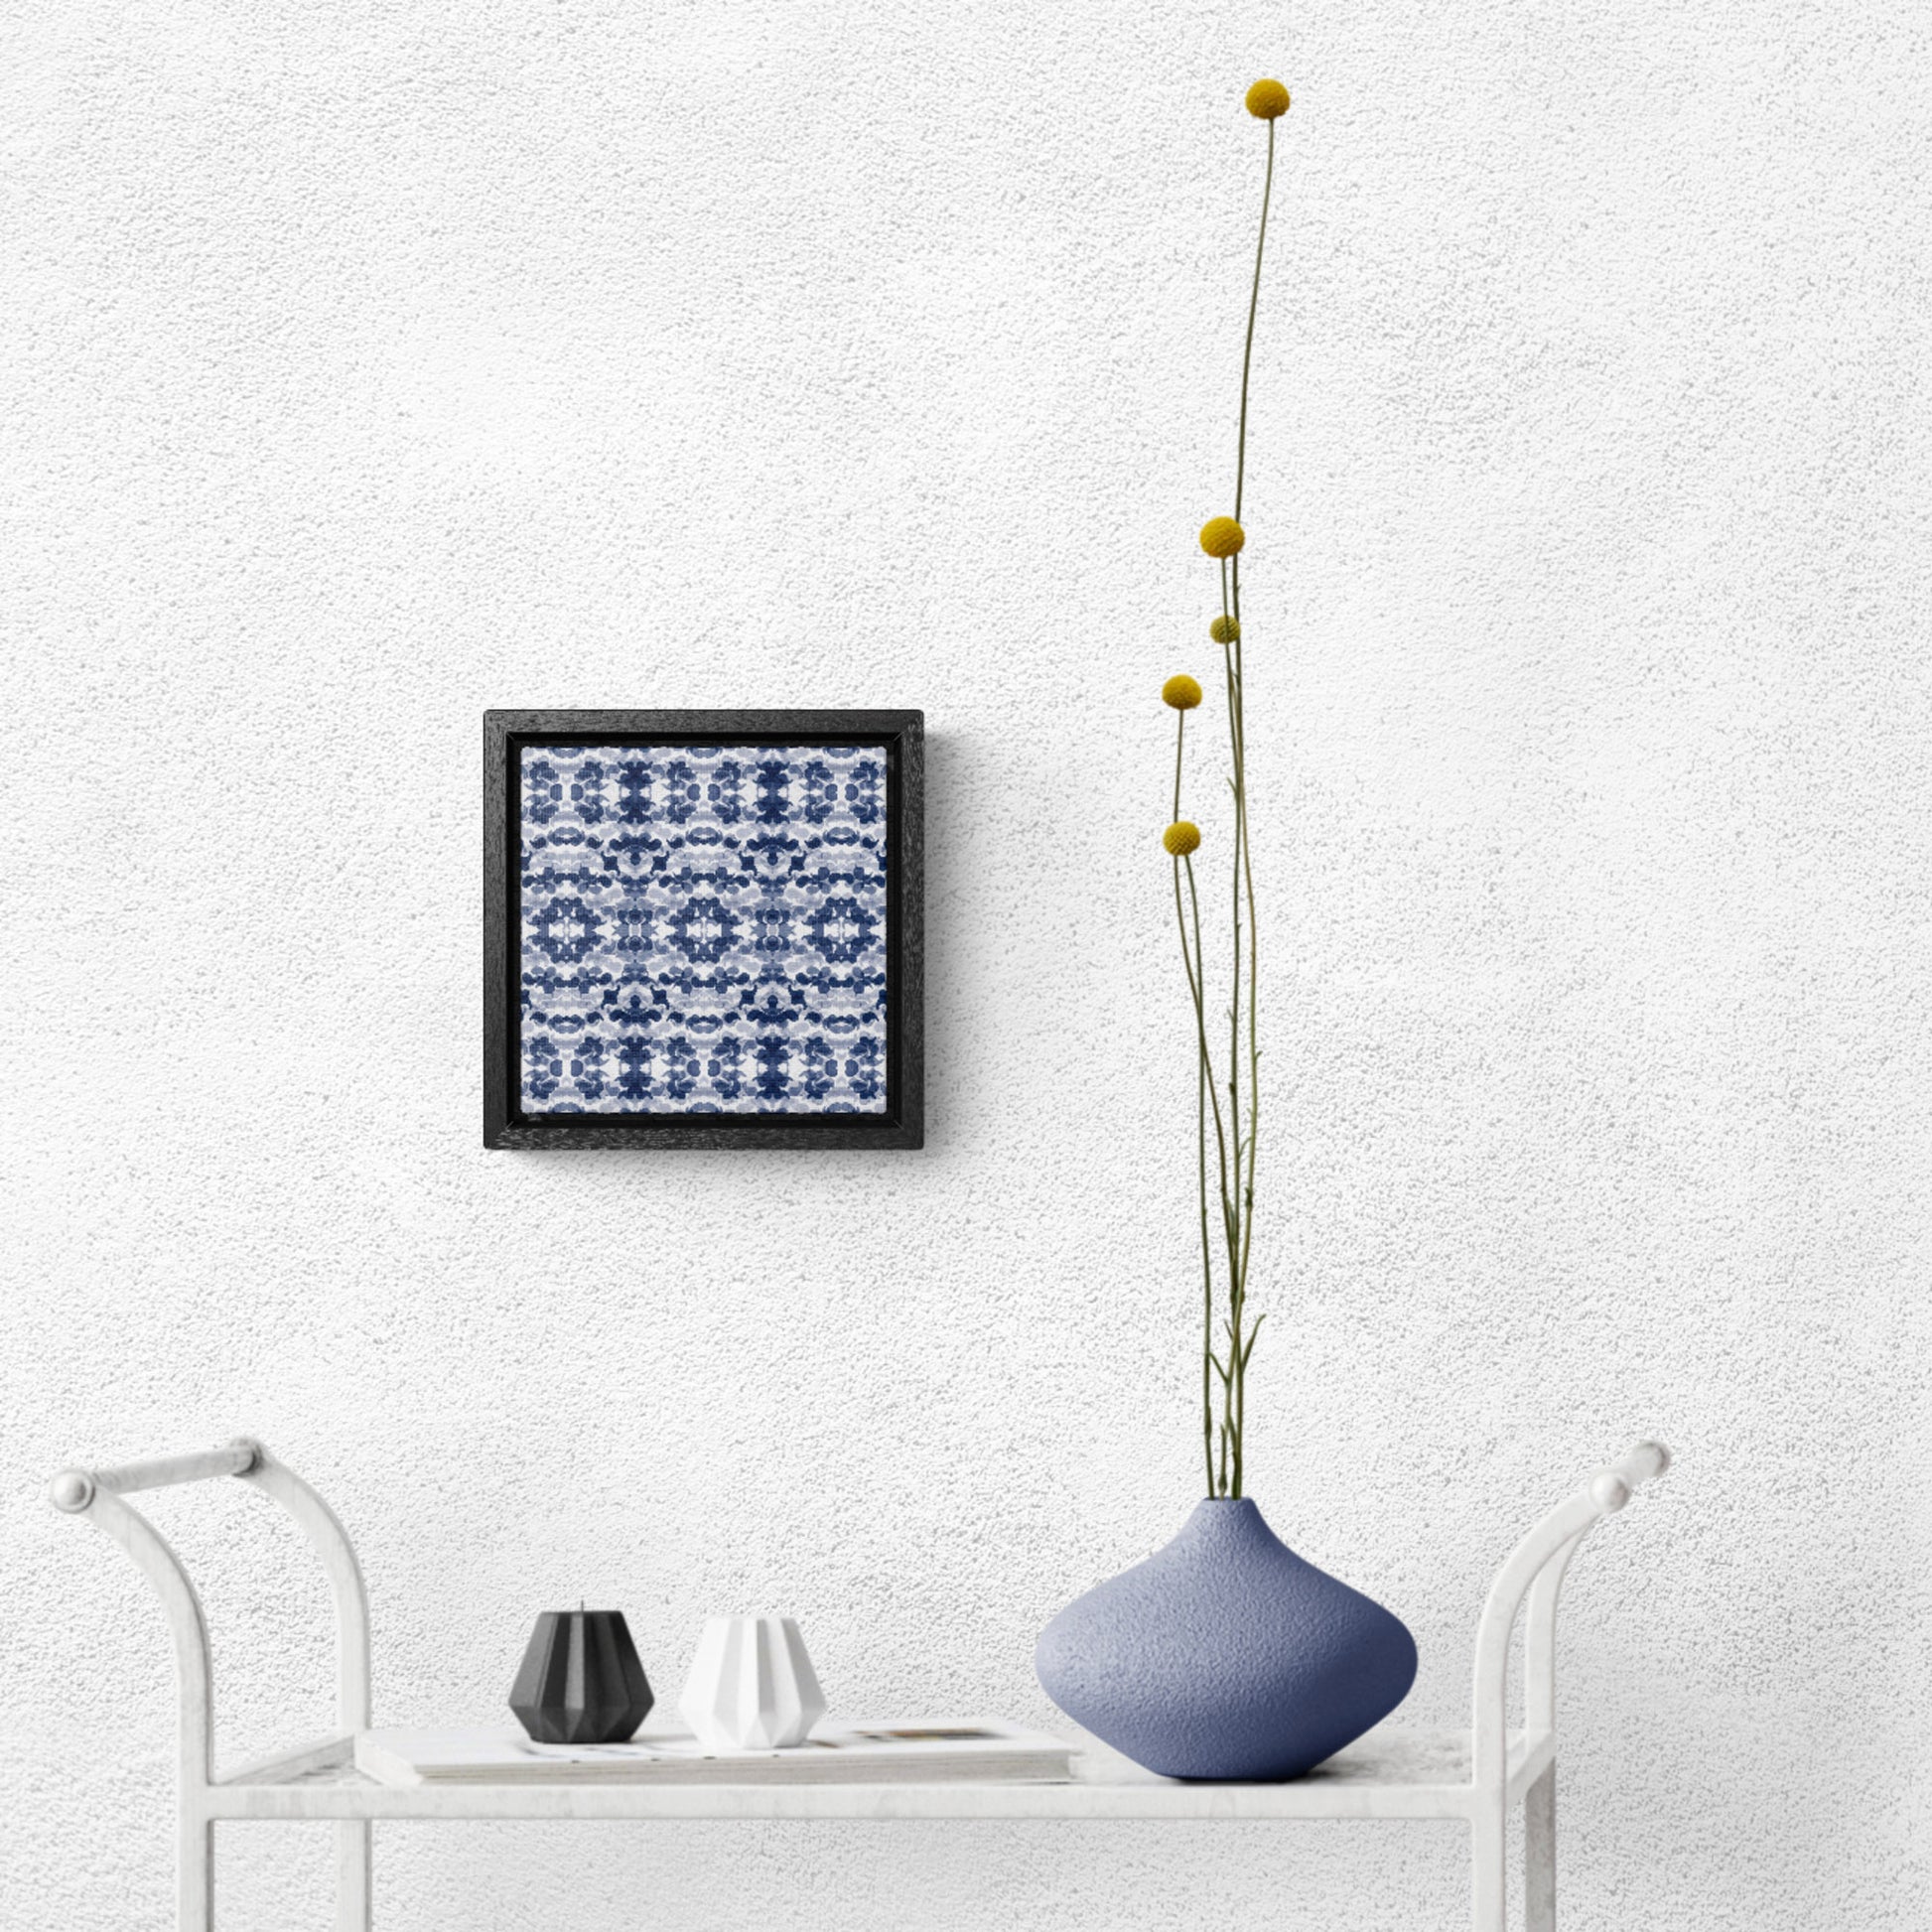 Smalled framed canvas featuring a navy blue paisley pattern hanging over a white tea cart and blue vase